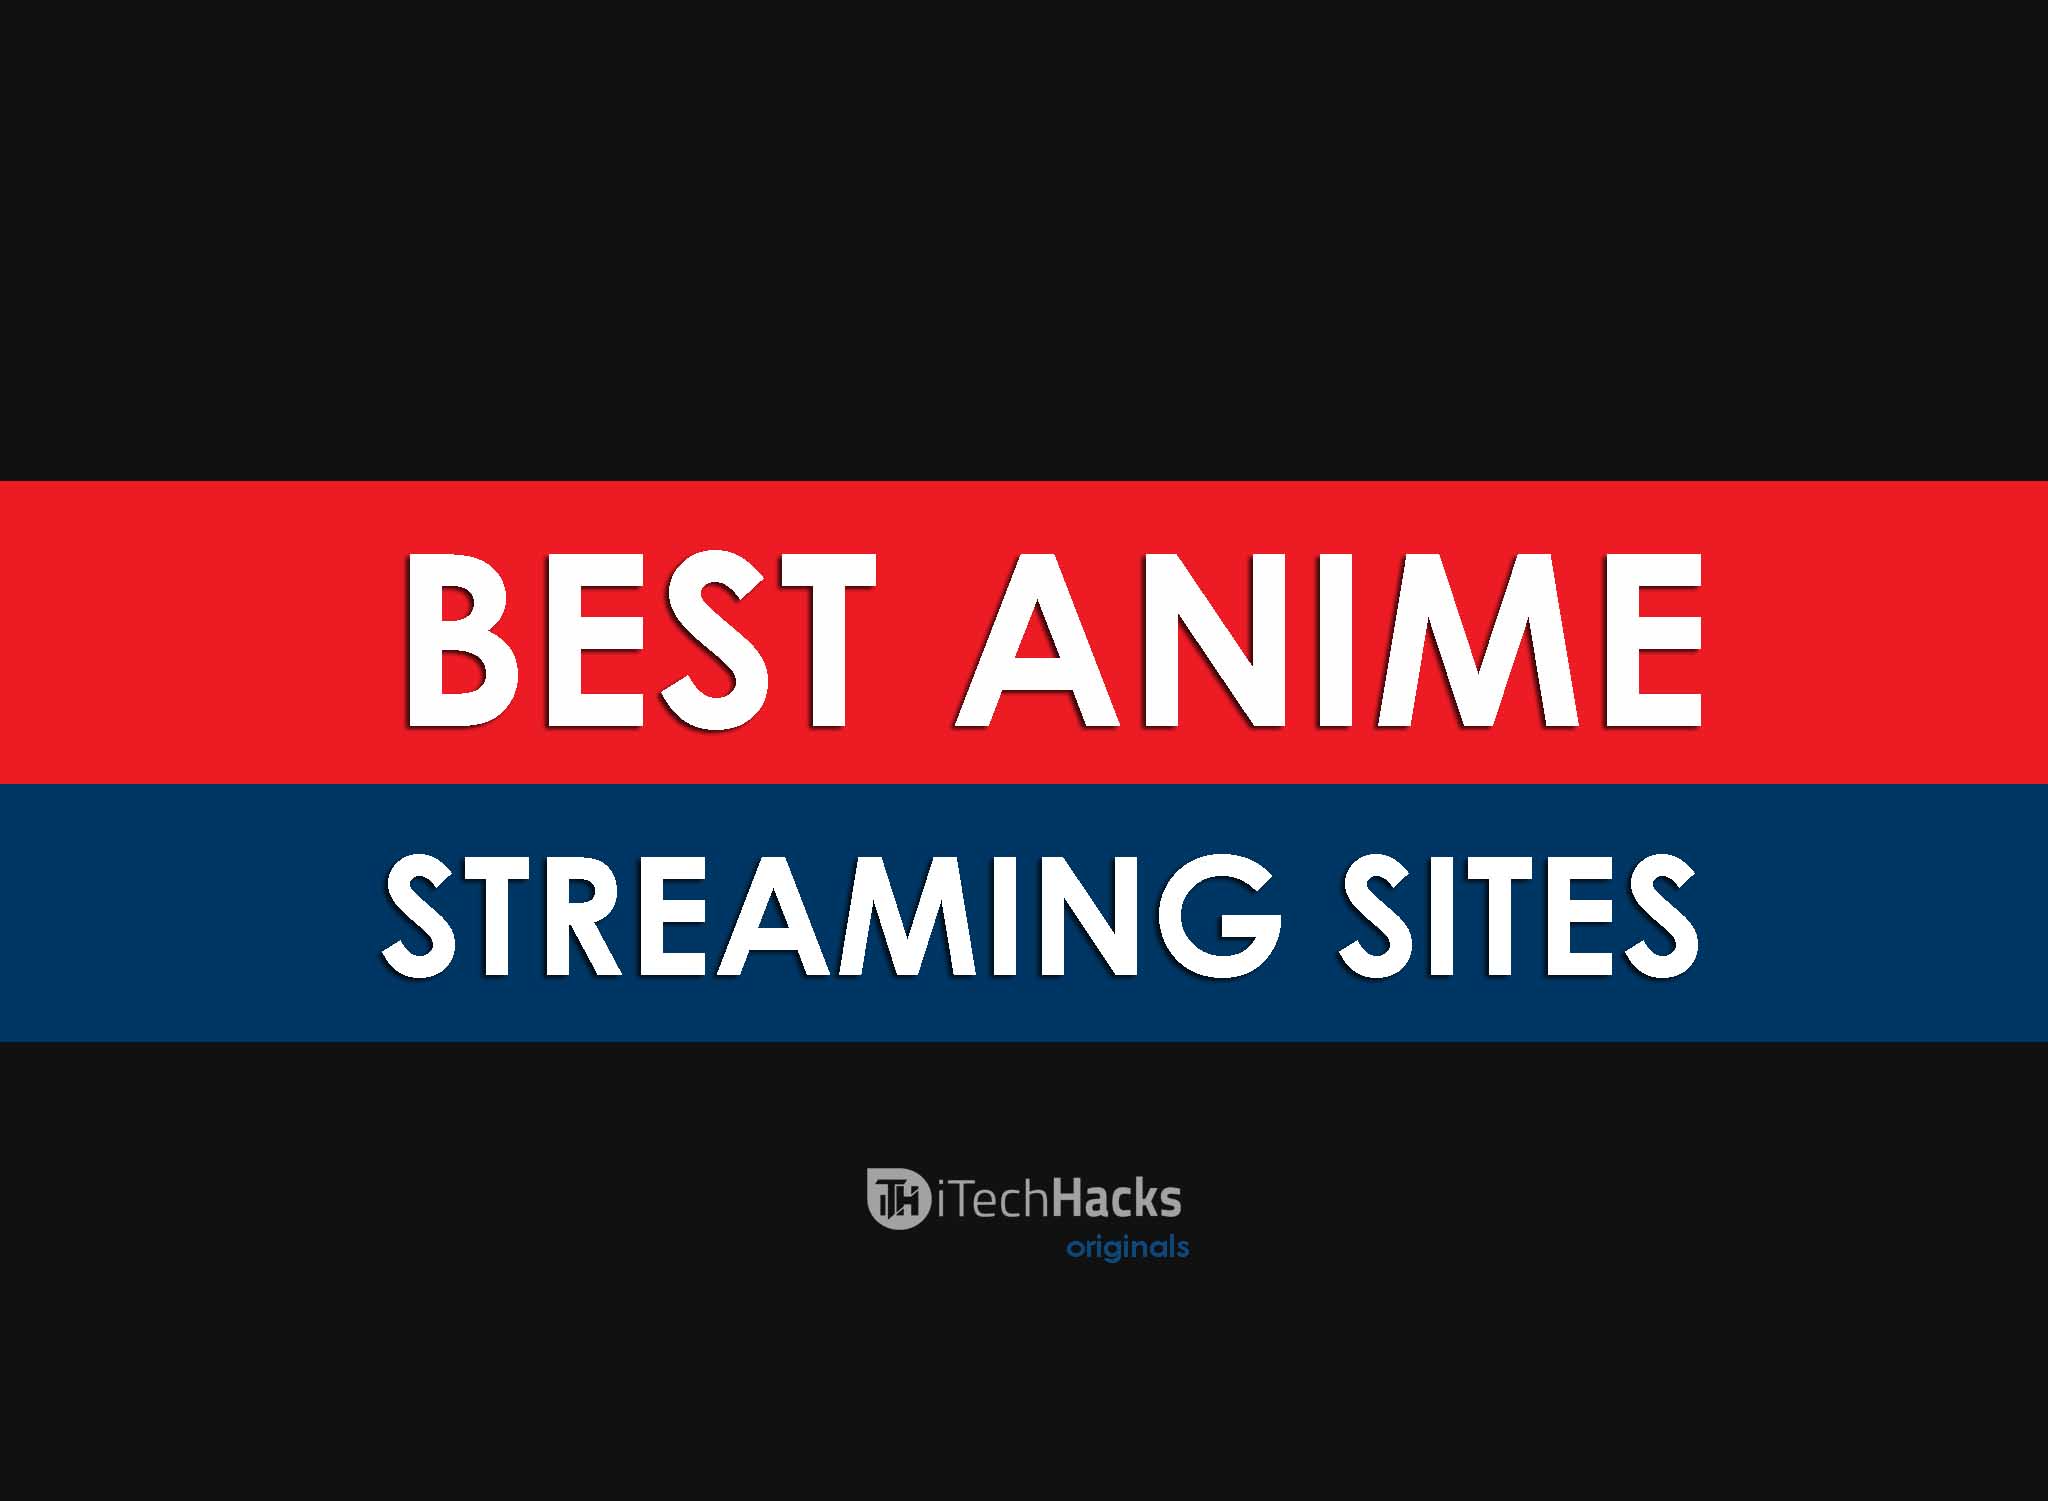 7 Legal anime streaming sites to watch anime